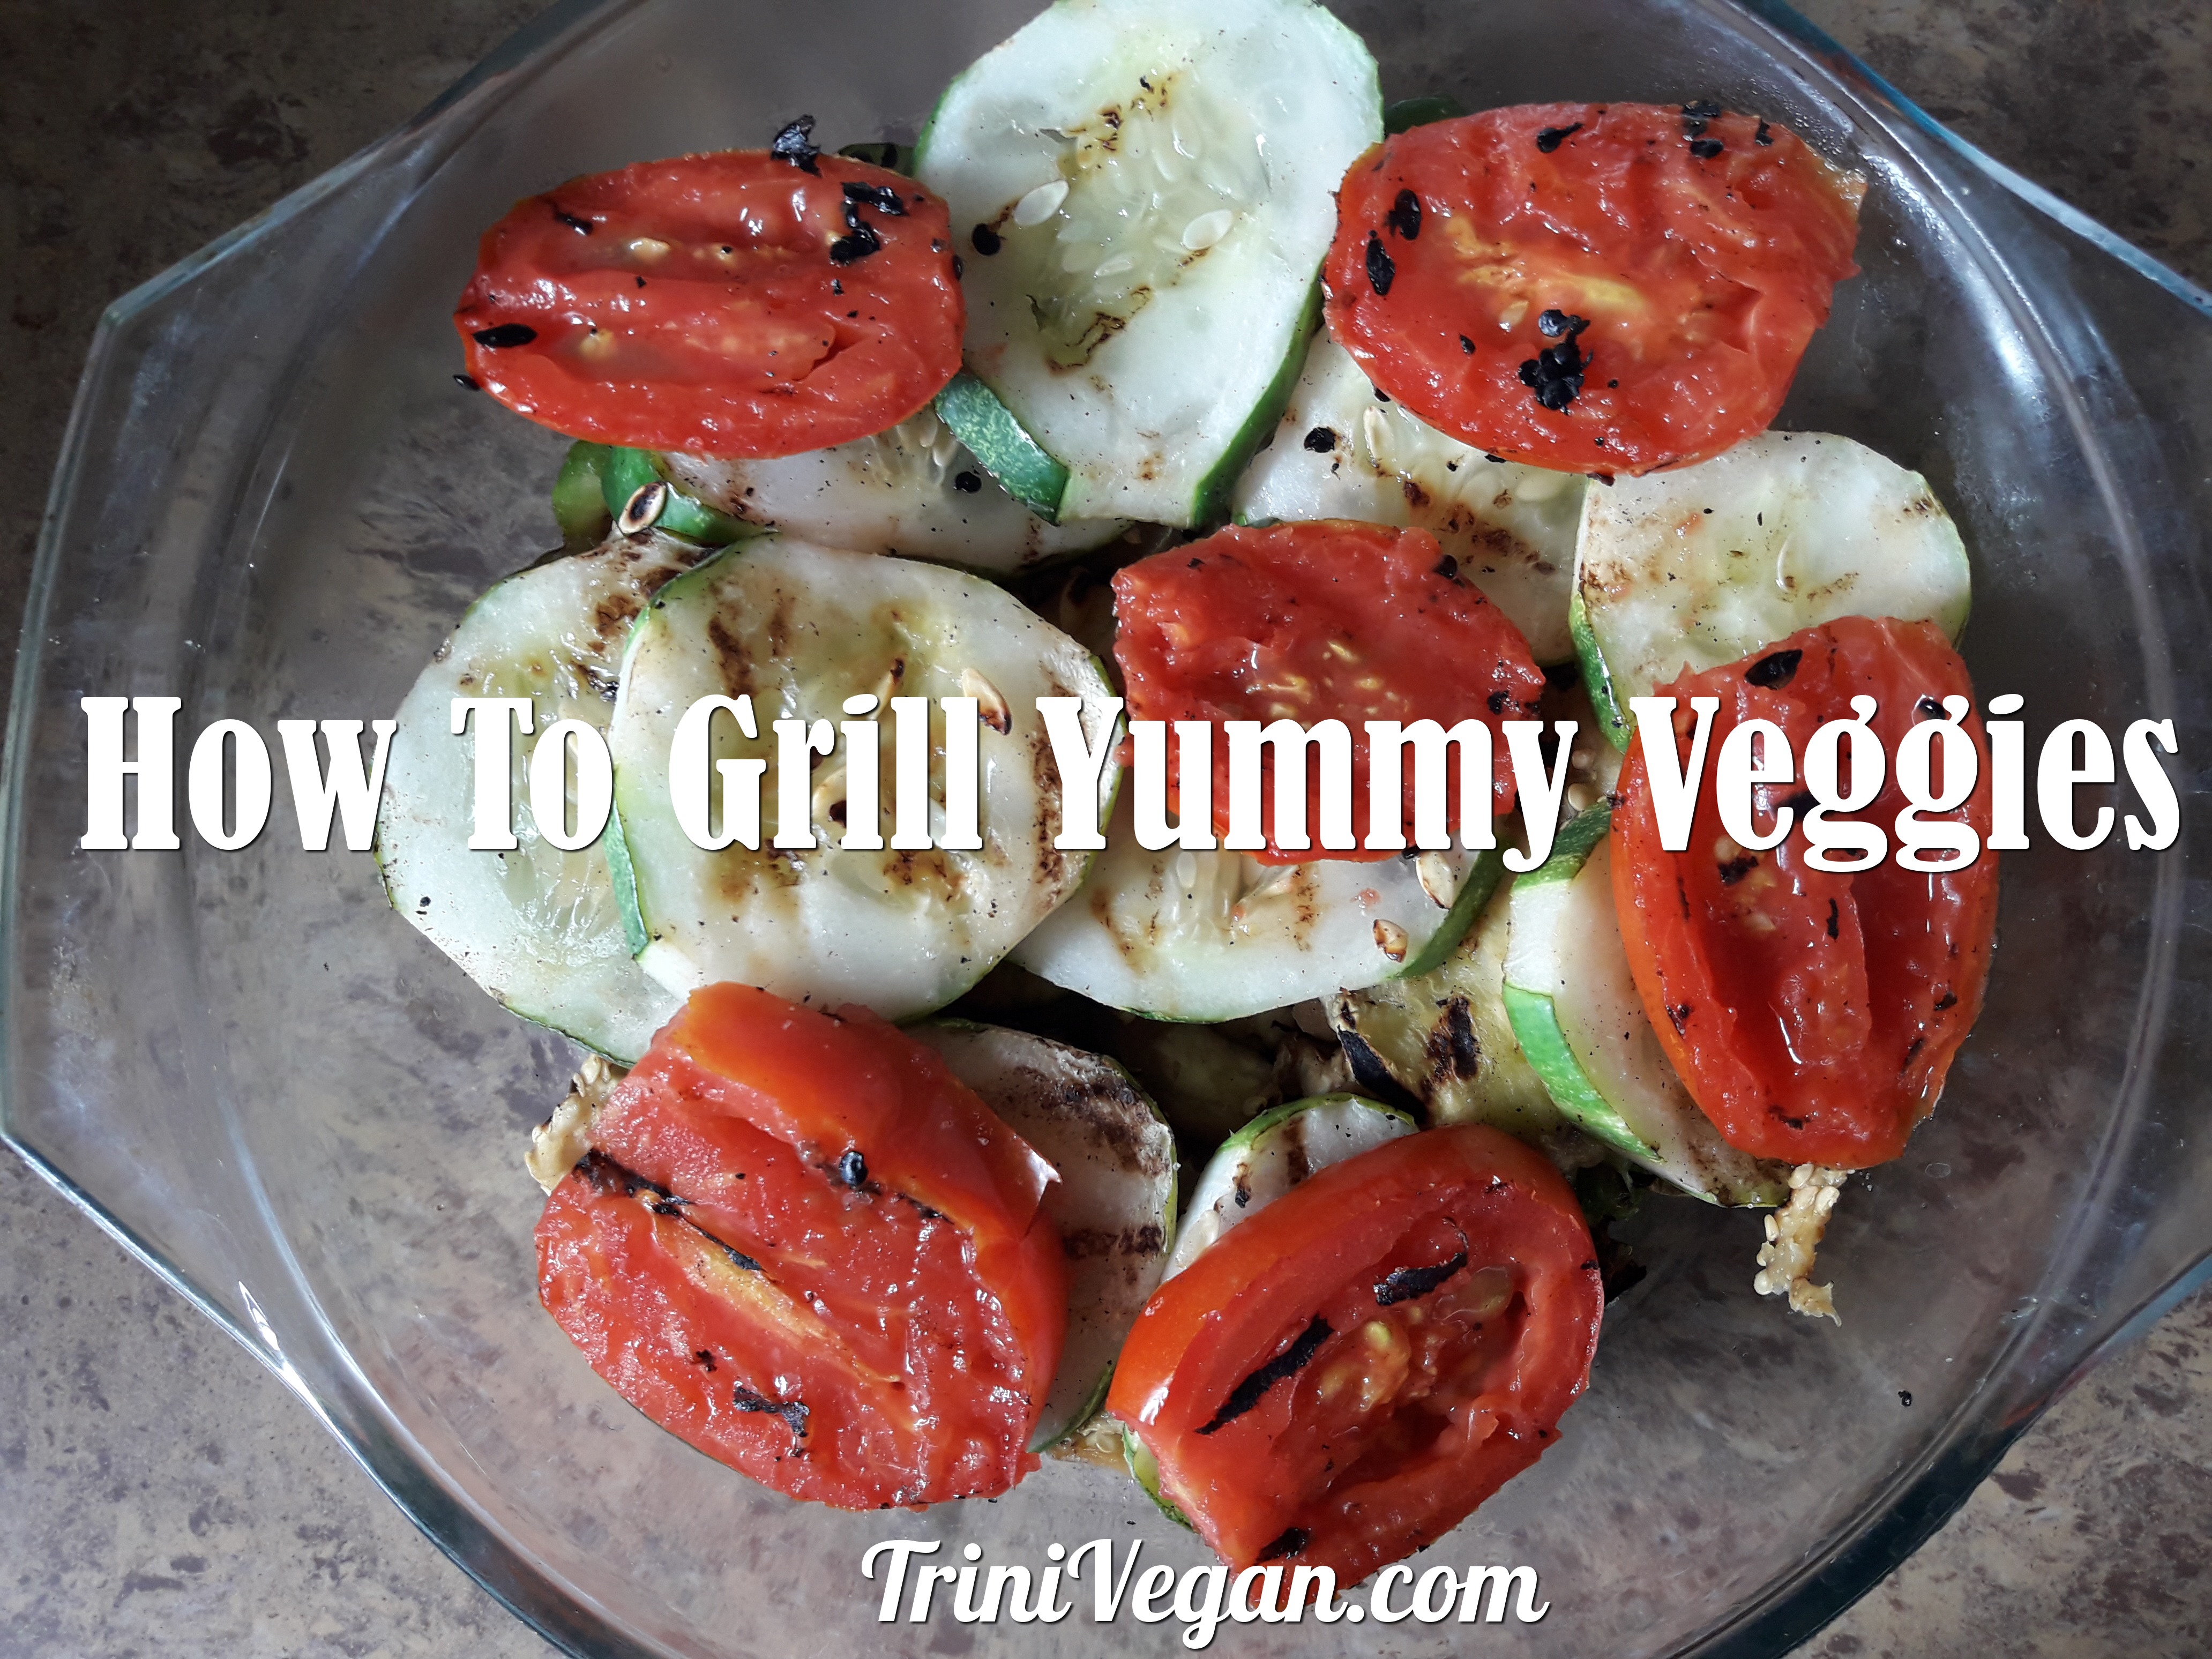 How To Grill Yummy Veggies